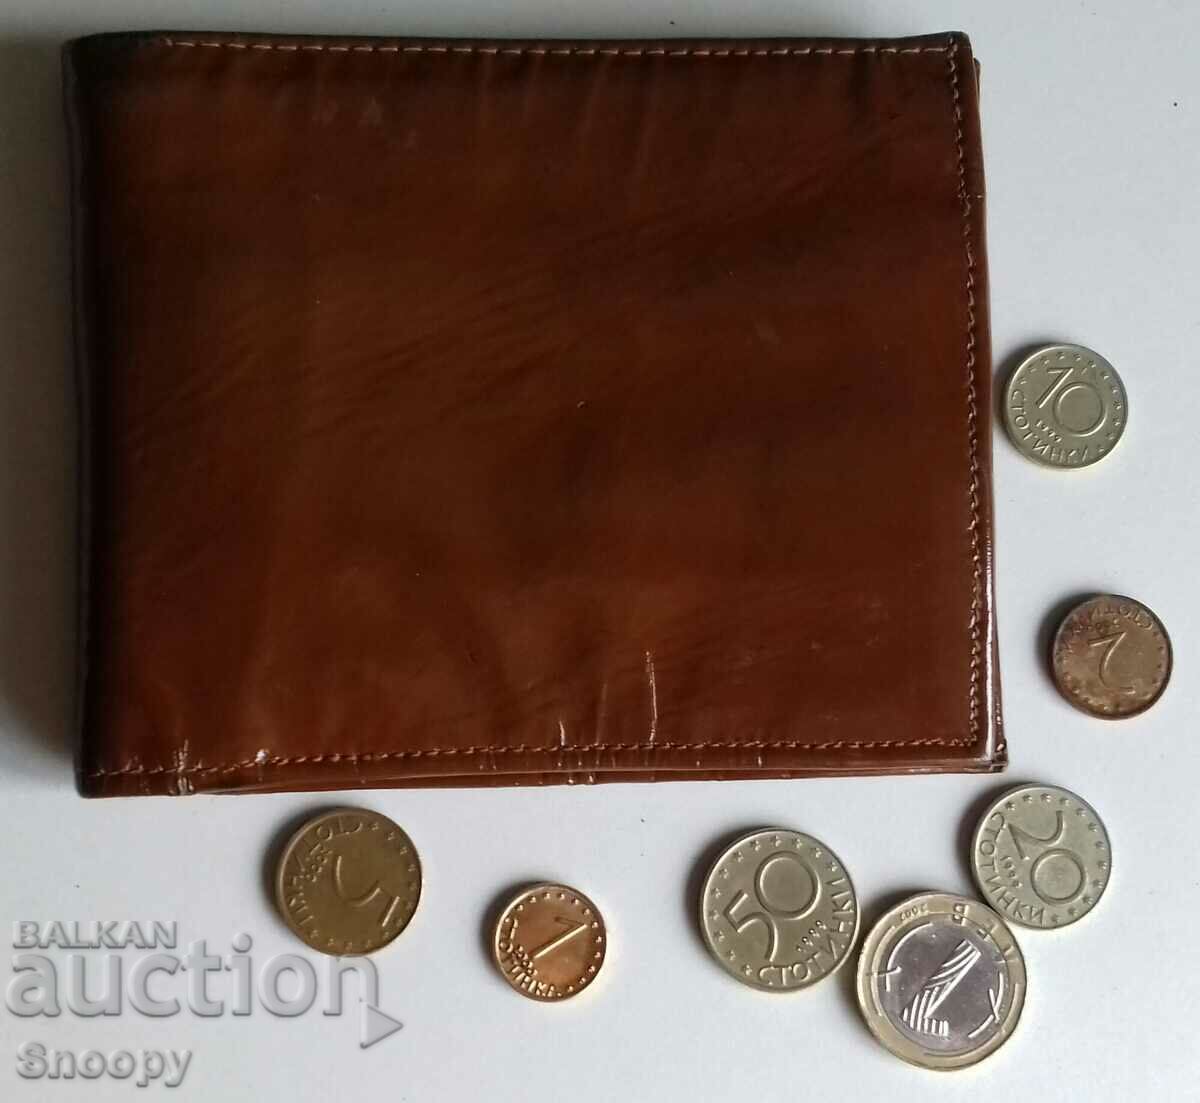 Wallet for banknotes, coins and cards